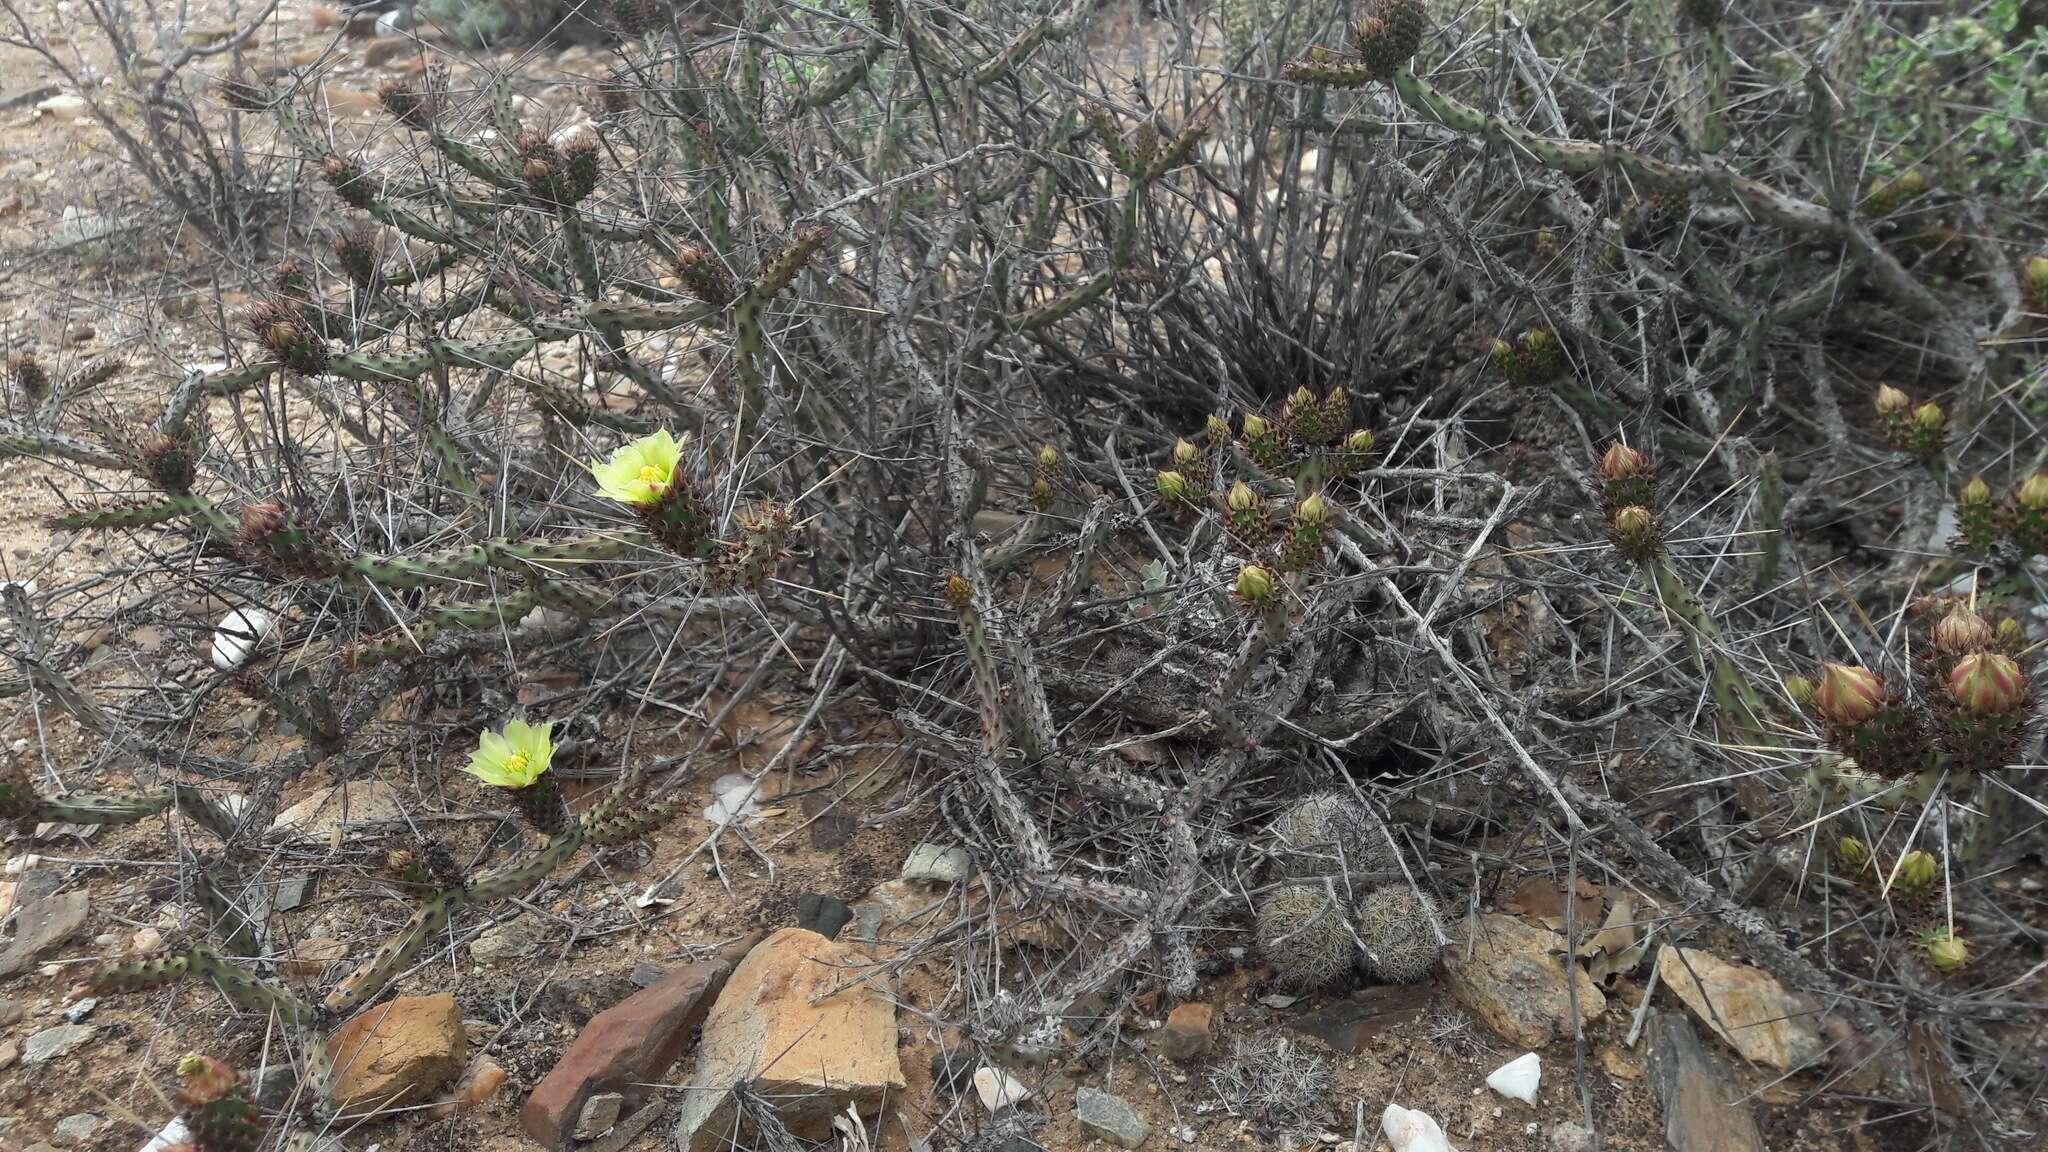 Image de Cylindropuntia tesajo (Engelm. ex J. M. Coult.) F. M. Knuth